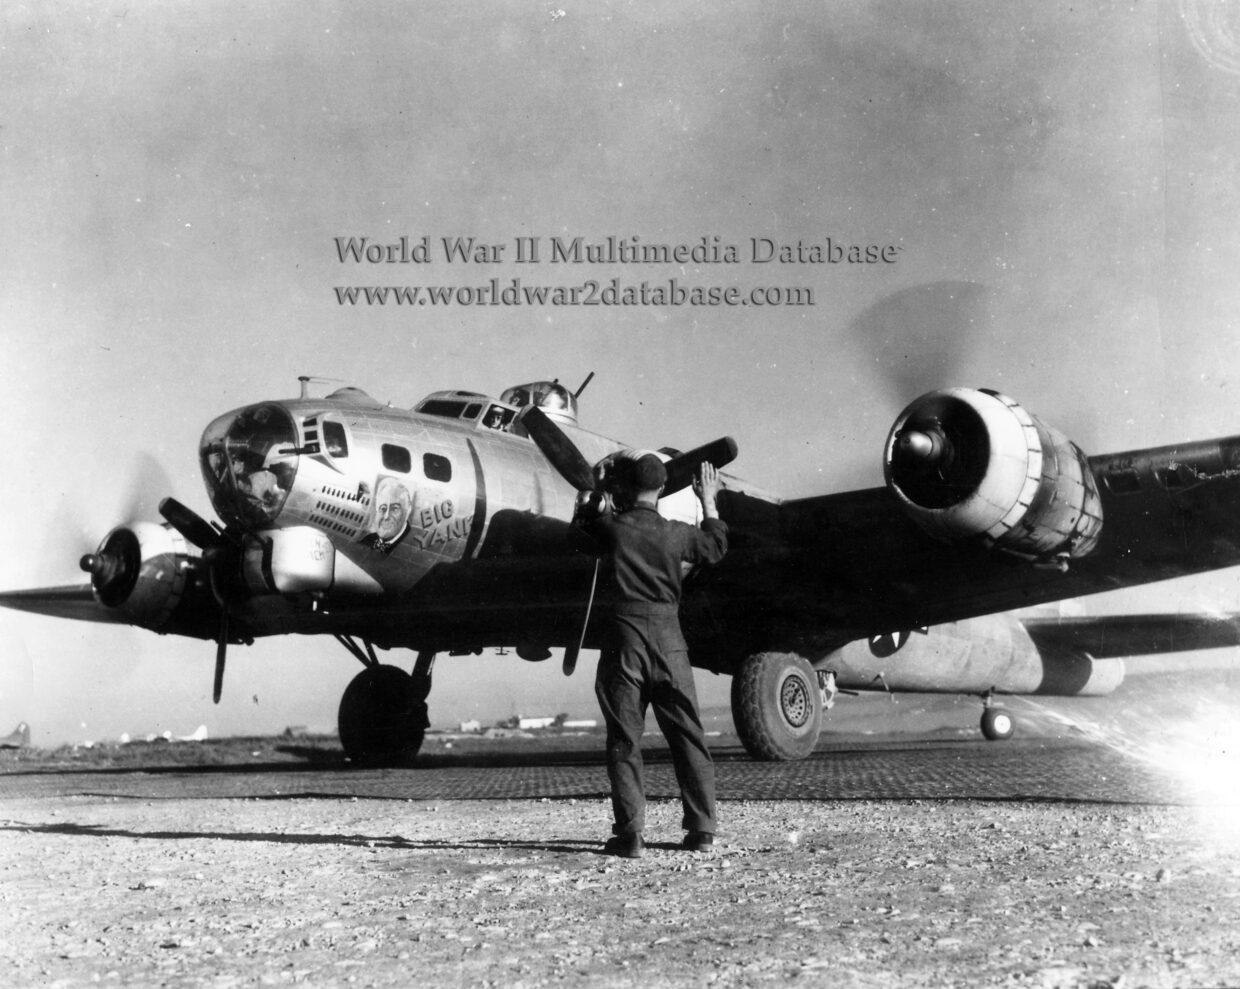 B-17G Flying Fortress “Big Yank“ of 483rd Bombardment Group